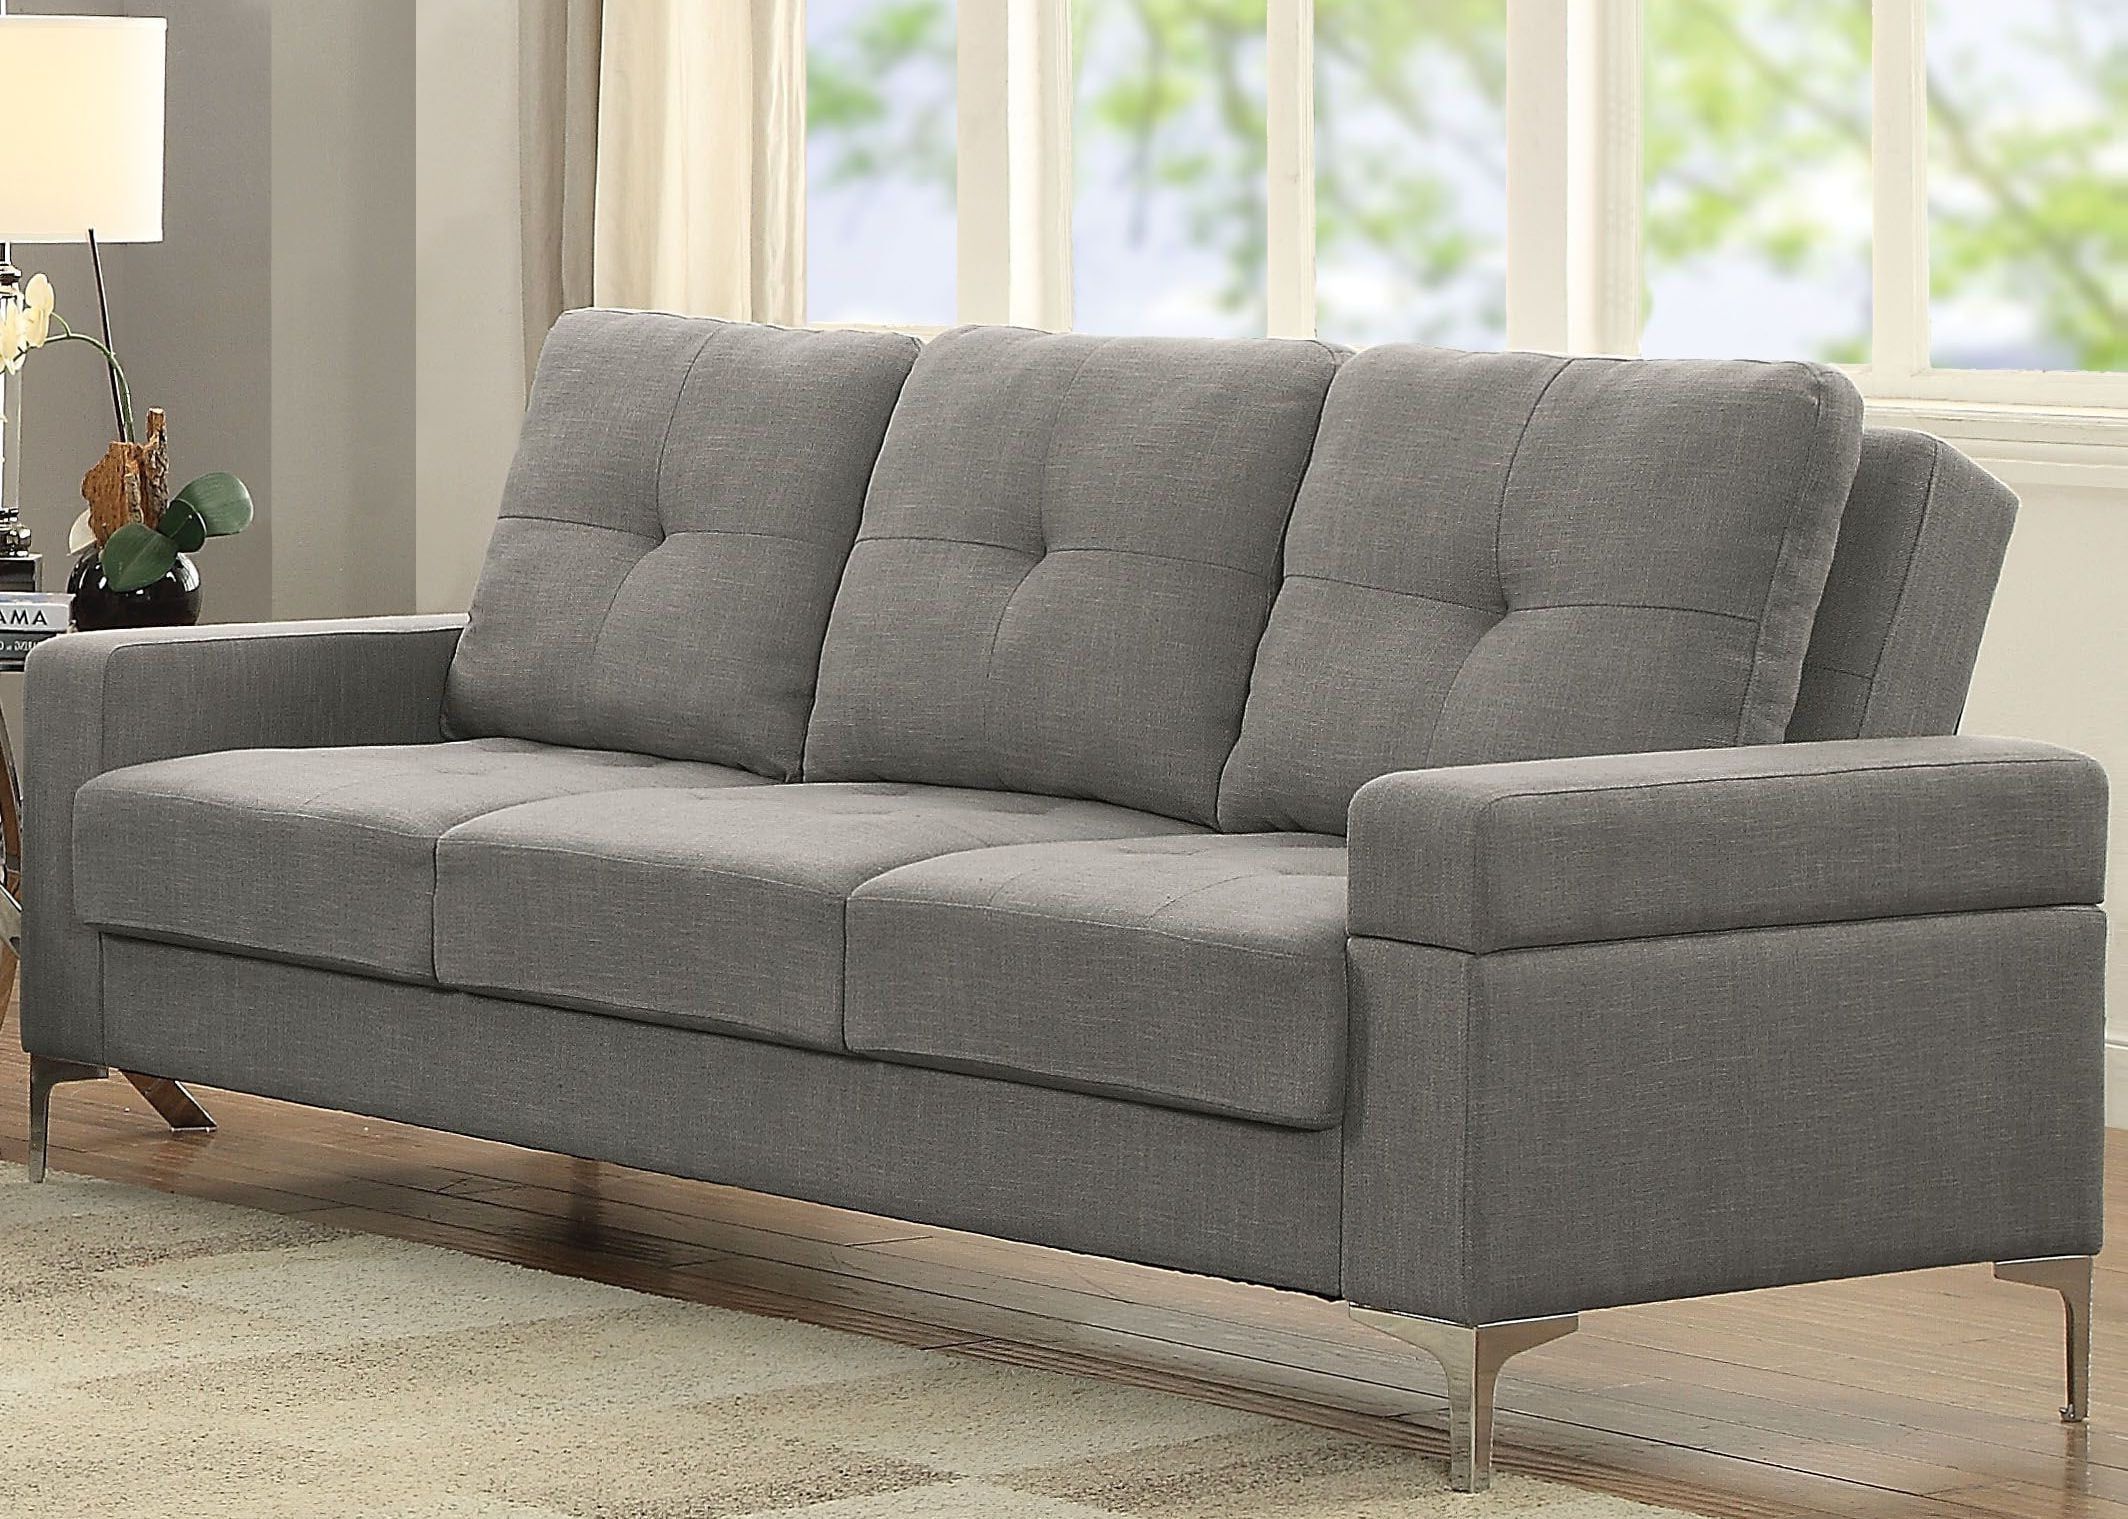 Coleman Furniture With Regard To Widely Used Gray Linen Sofas (View 7 of 15)